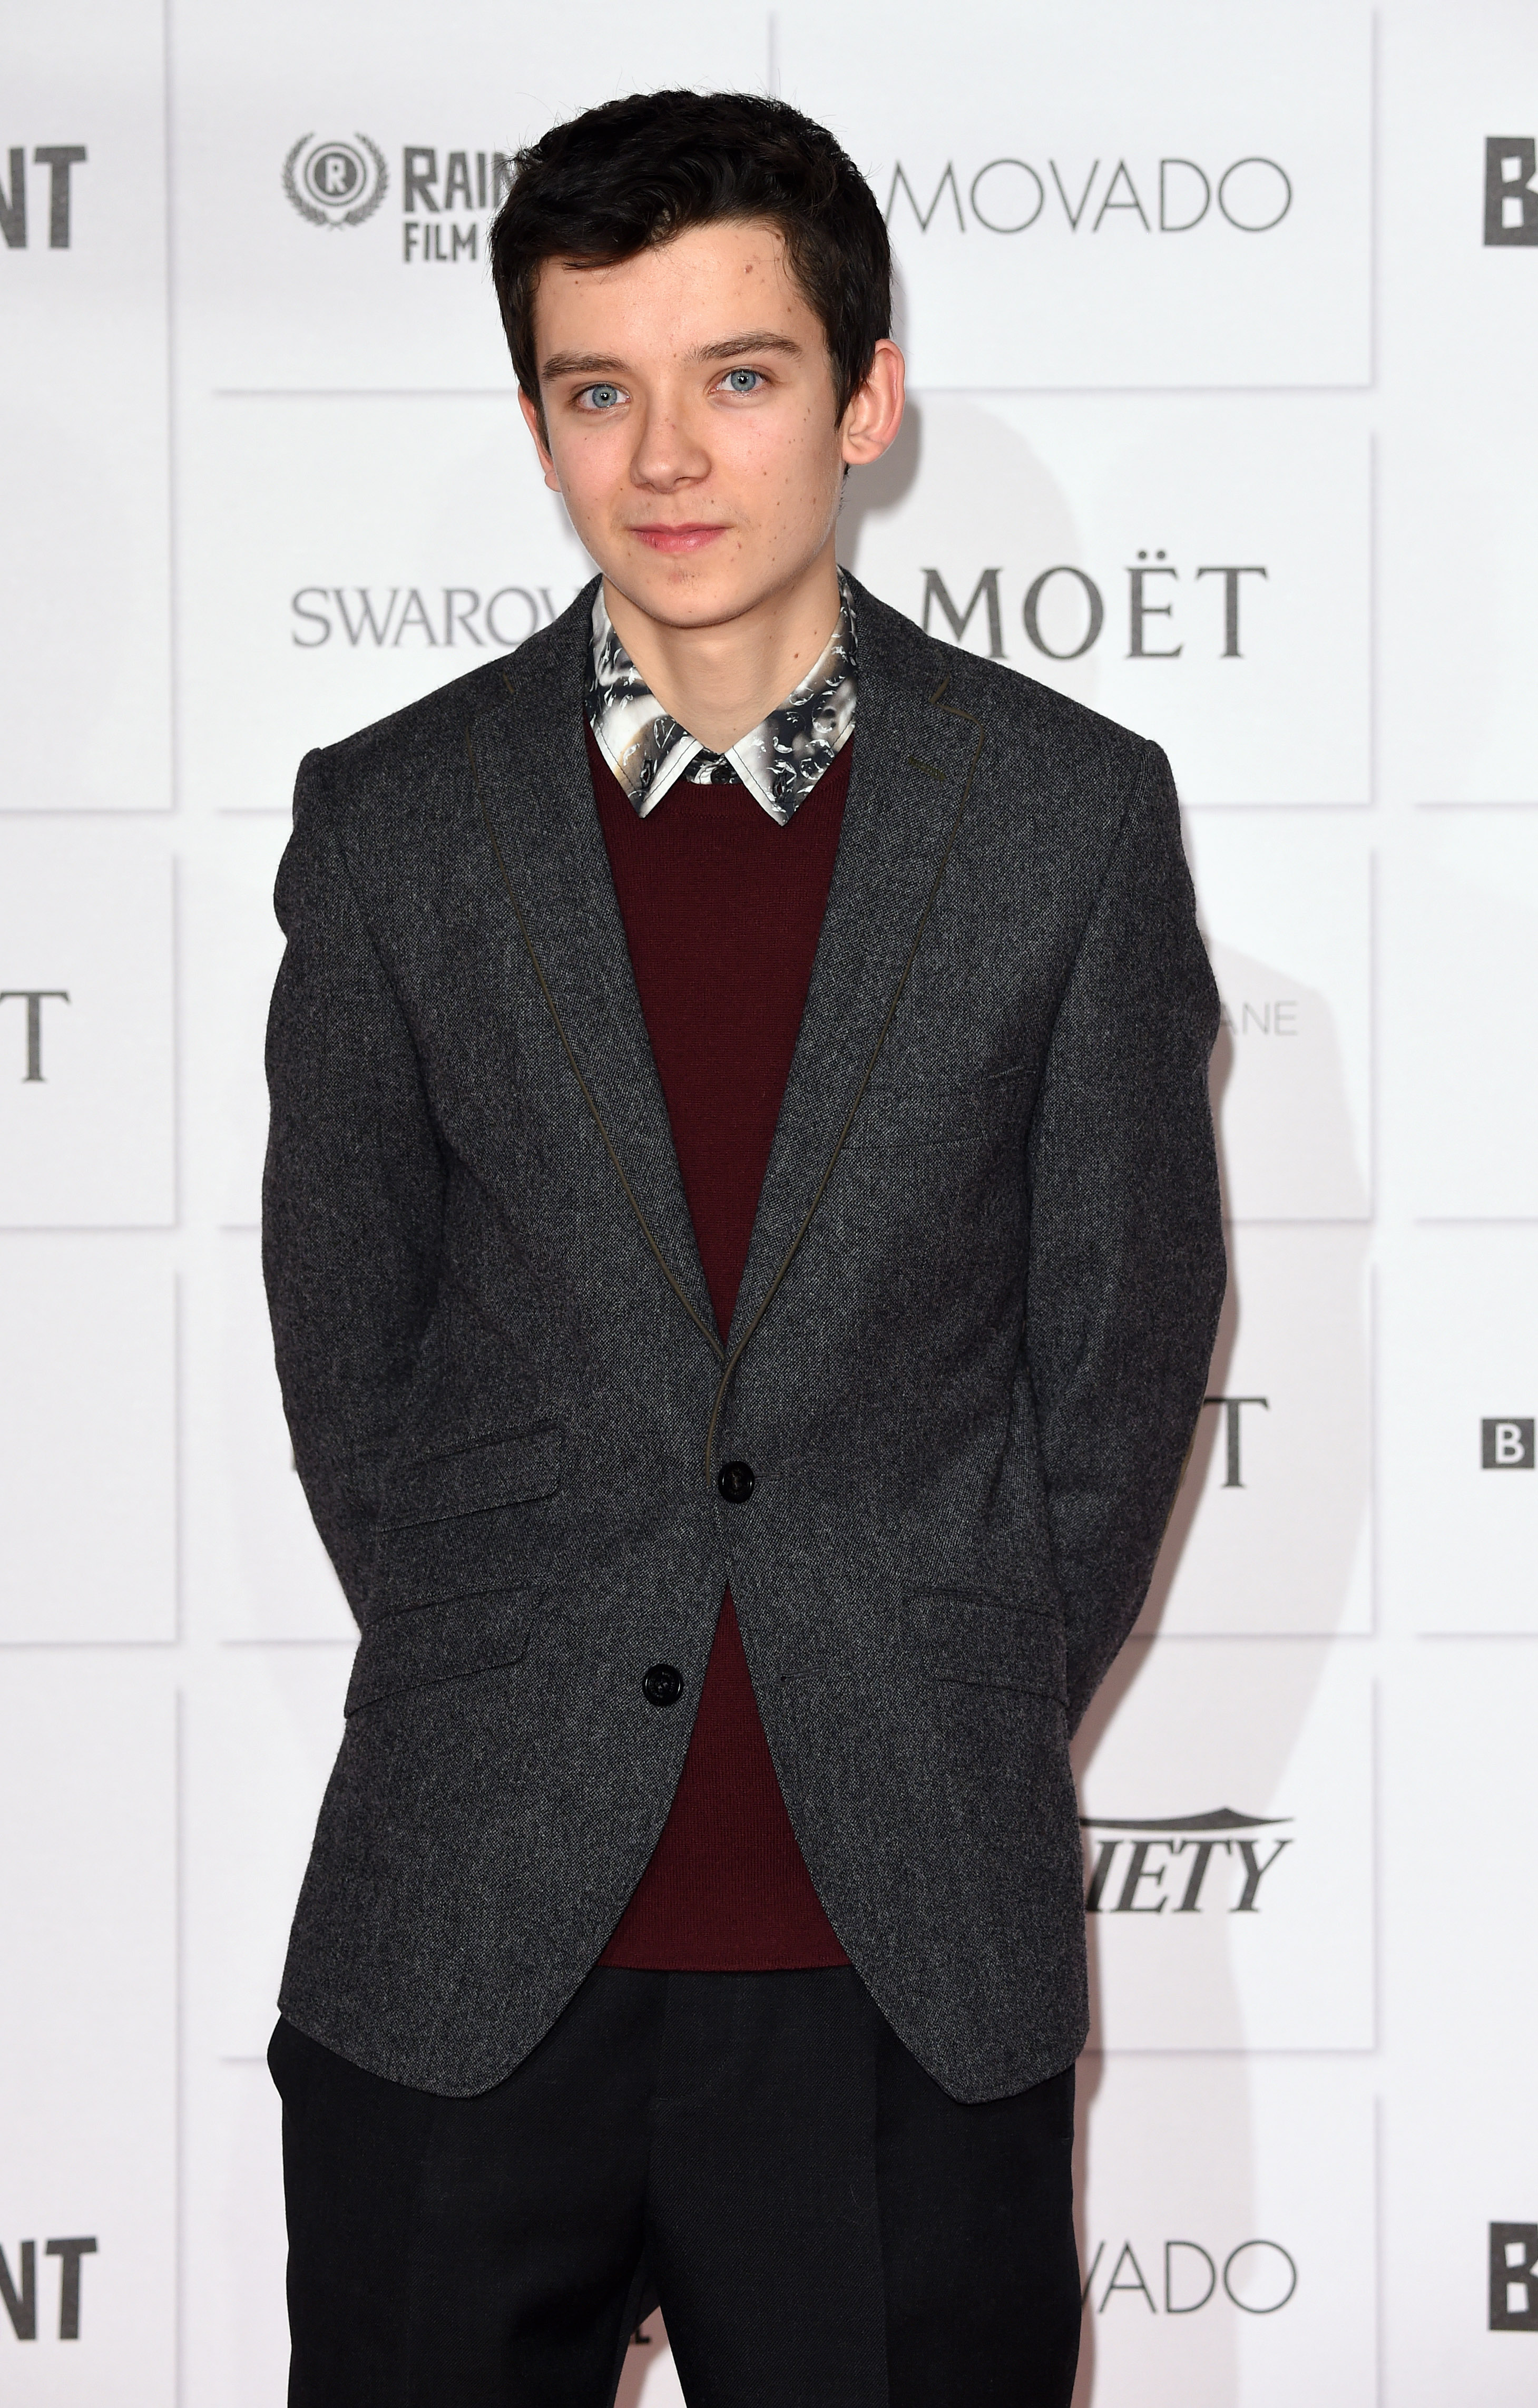 Asa Butterfield attends the Moet British Independent Film Awards on December 7, 2014 in London, England. (Karwai Tang--WireImage)